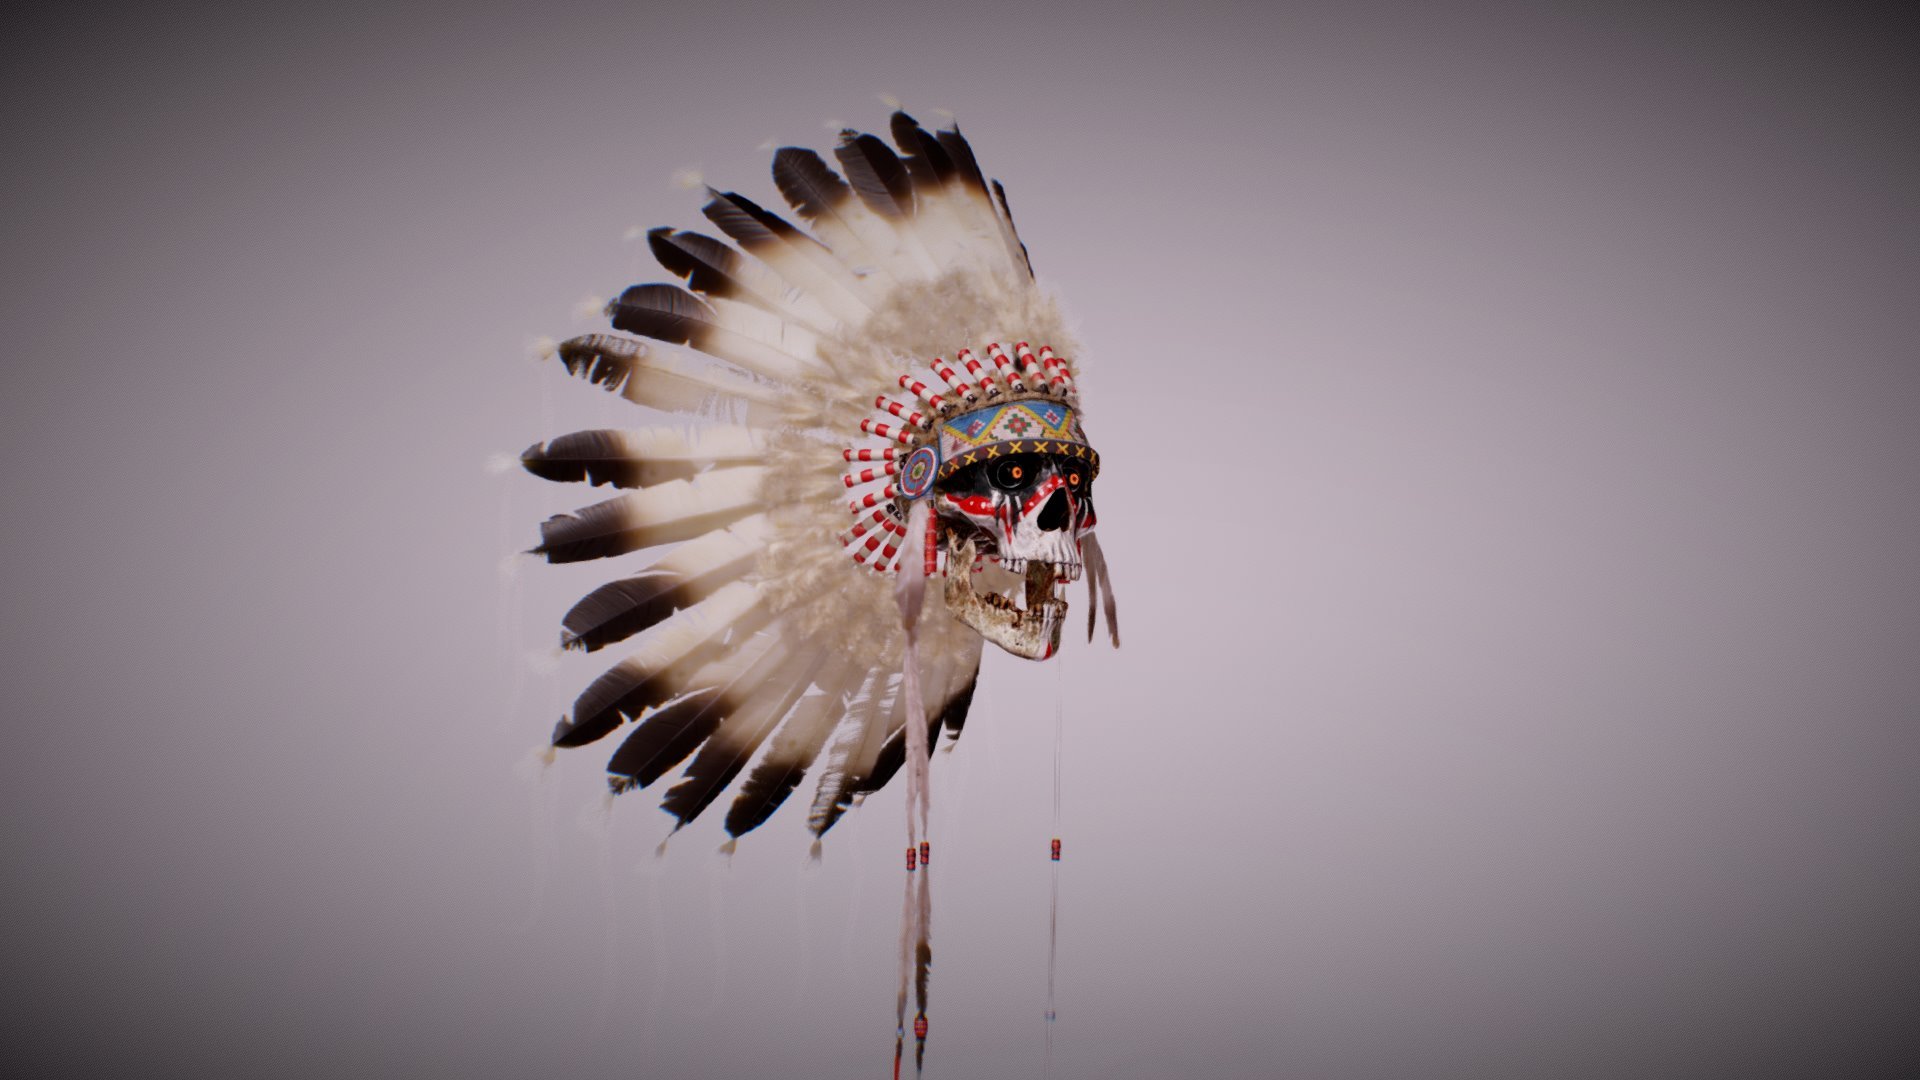 I originally intended it to be just a painted skull. Then I changes the concept upon studying references of the Native American headdress etc. This was a challenging and entertaining journey 3d model